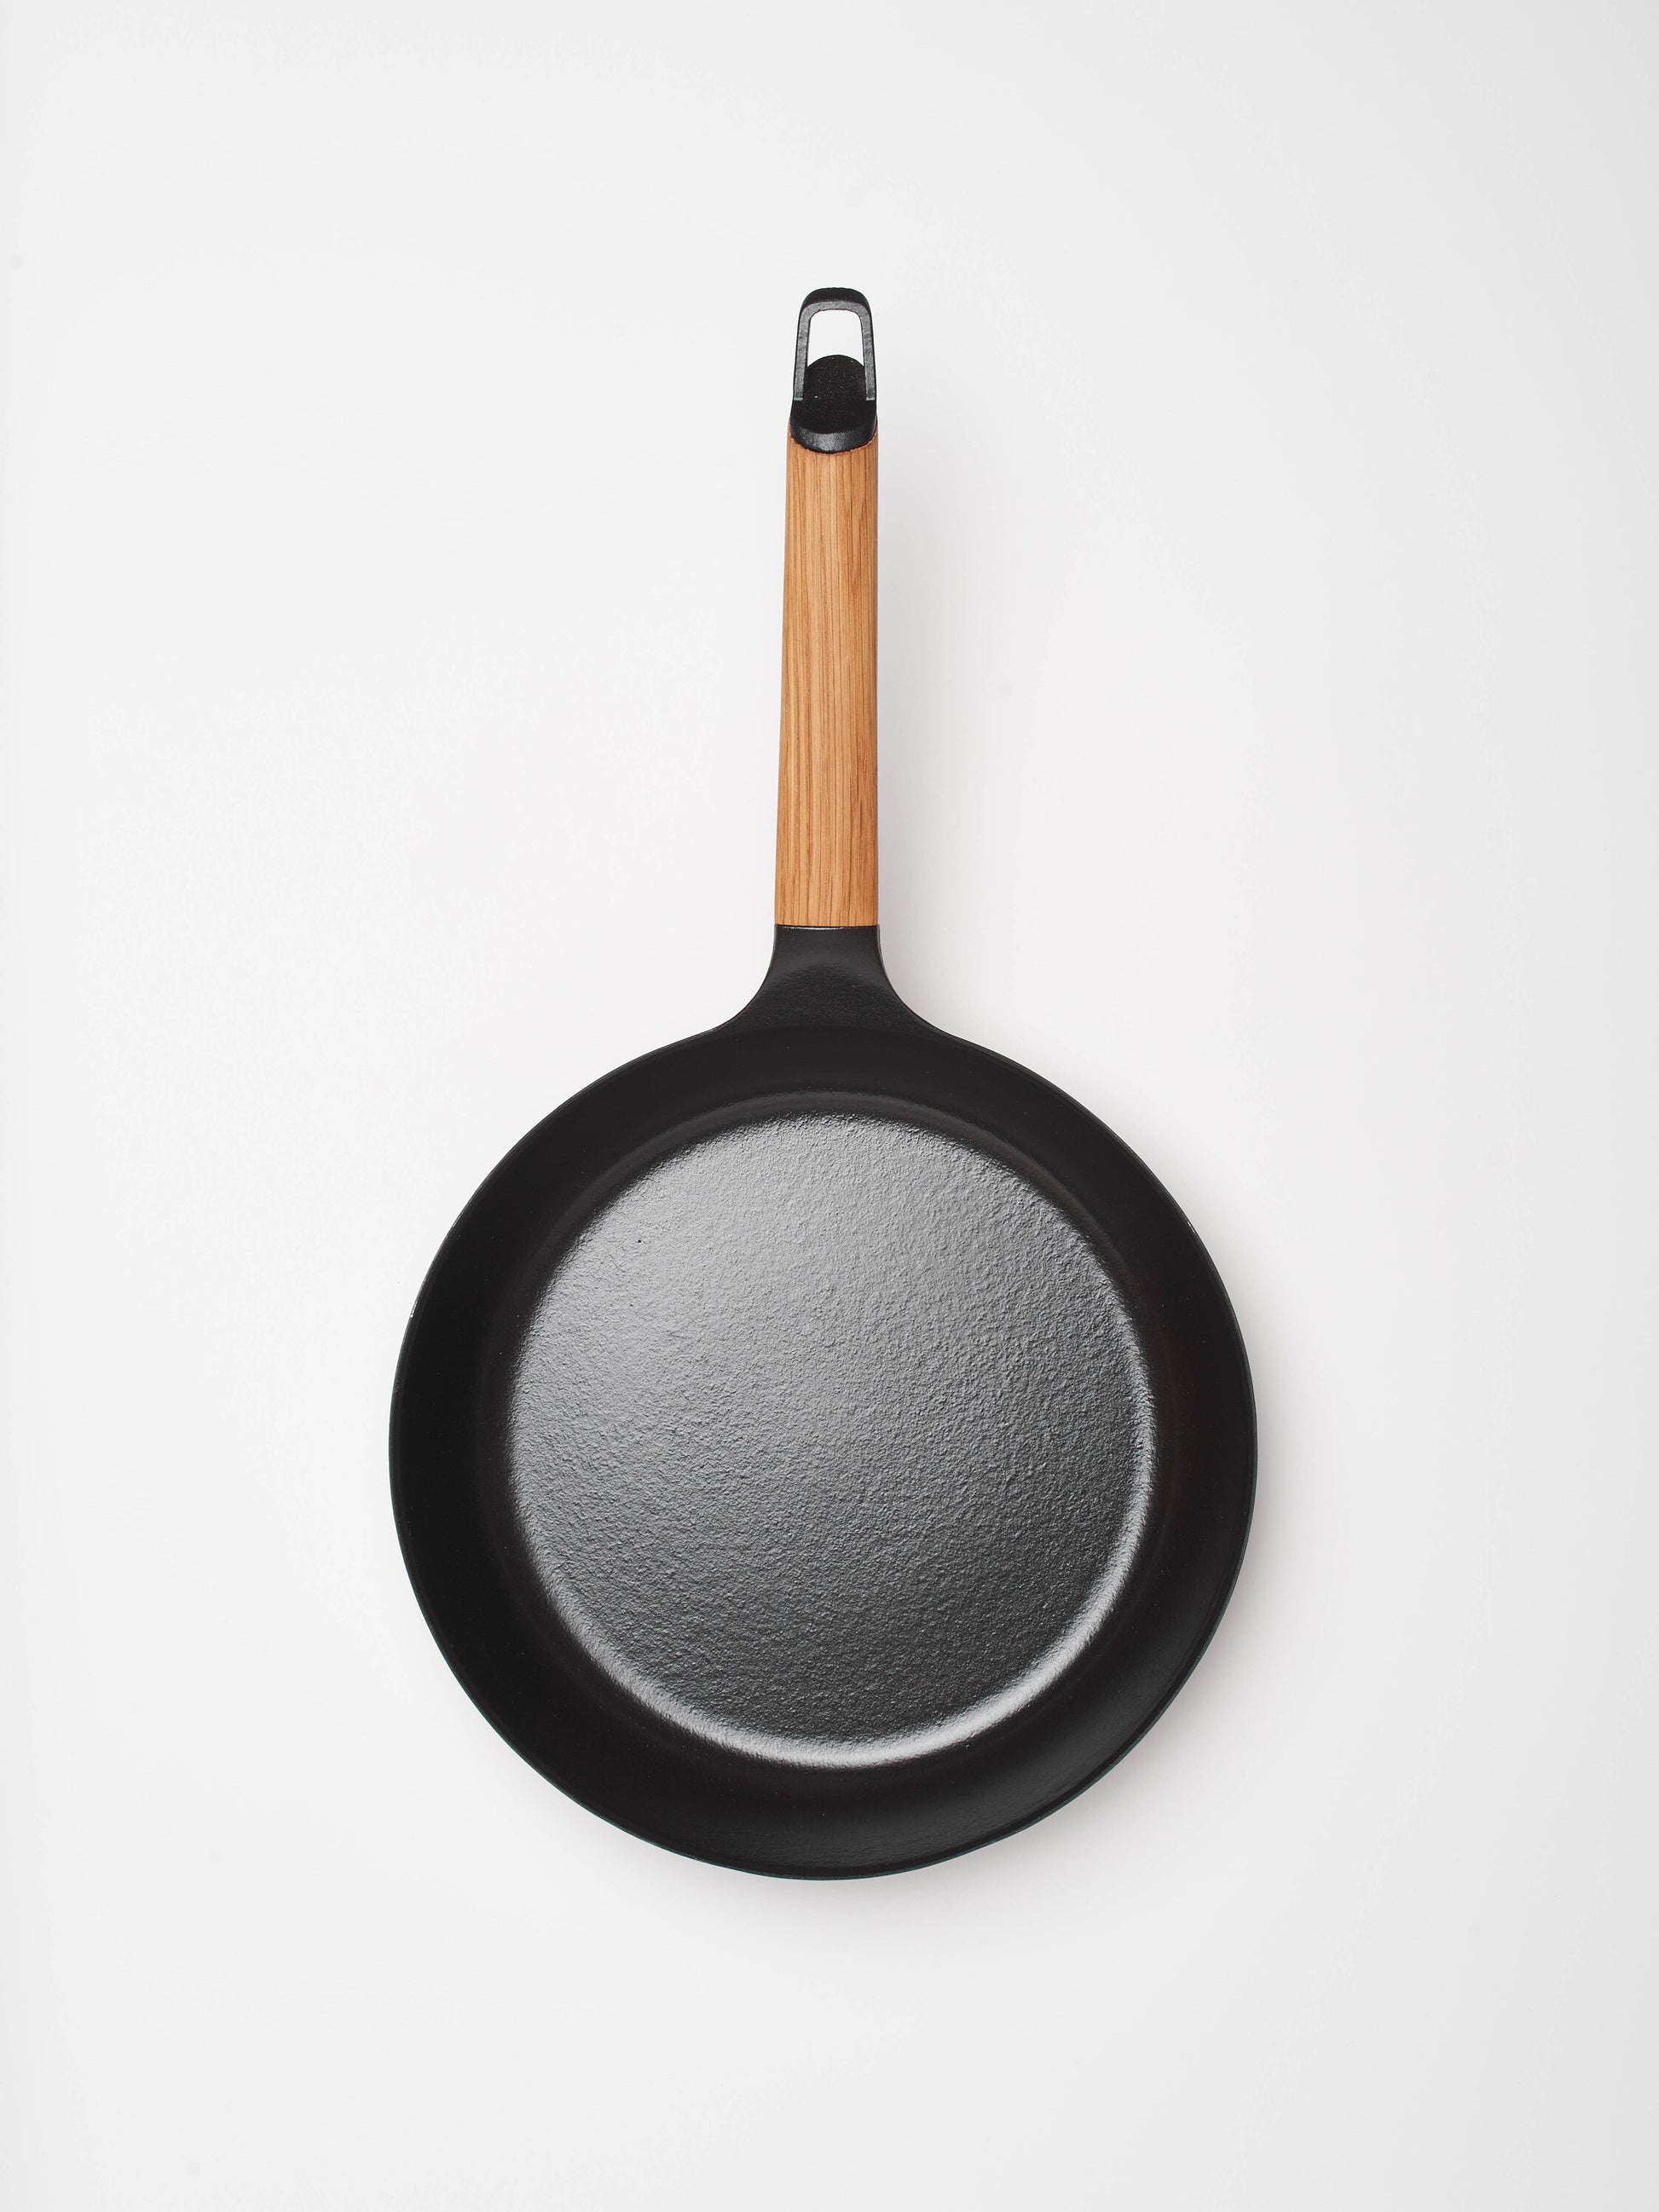 Vermicular Glass Lid for Frying Pans - 11” | Free-Standing | Made in Japan